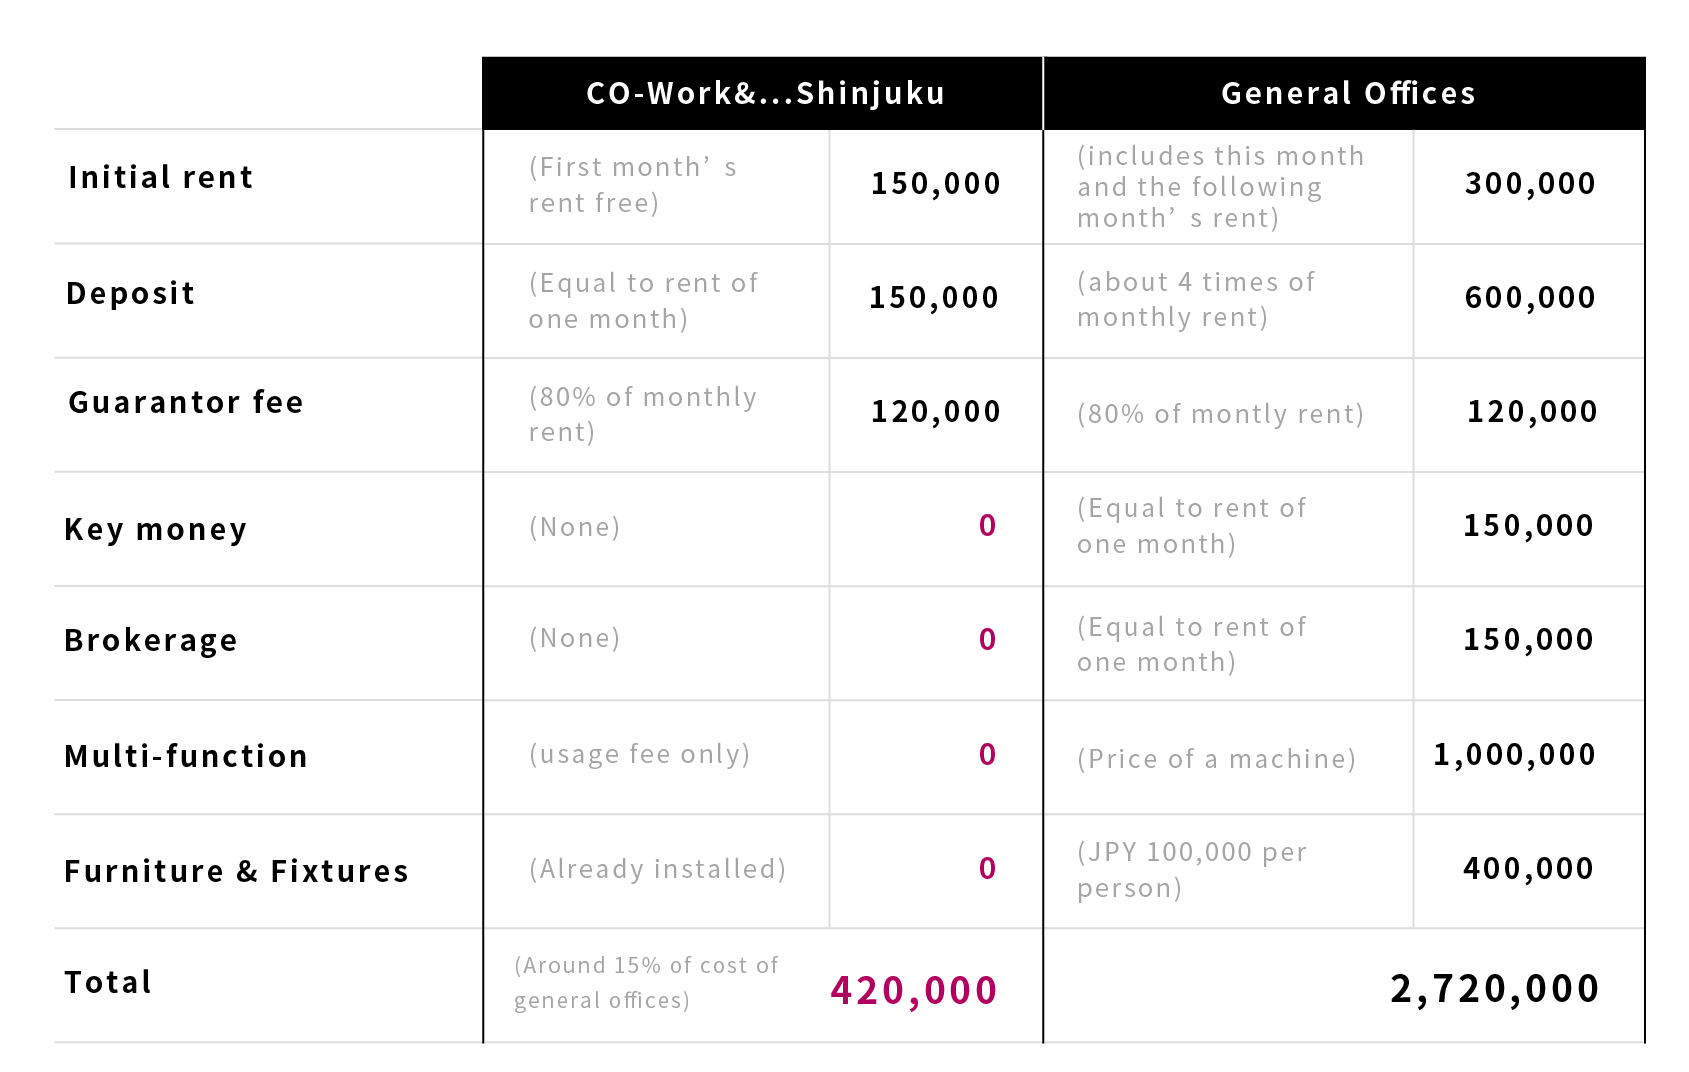 Cost comparison between Co-work & Shinjuku and general offices.